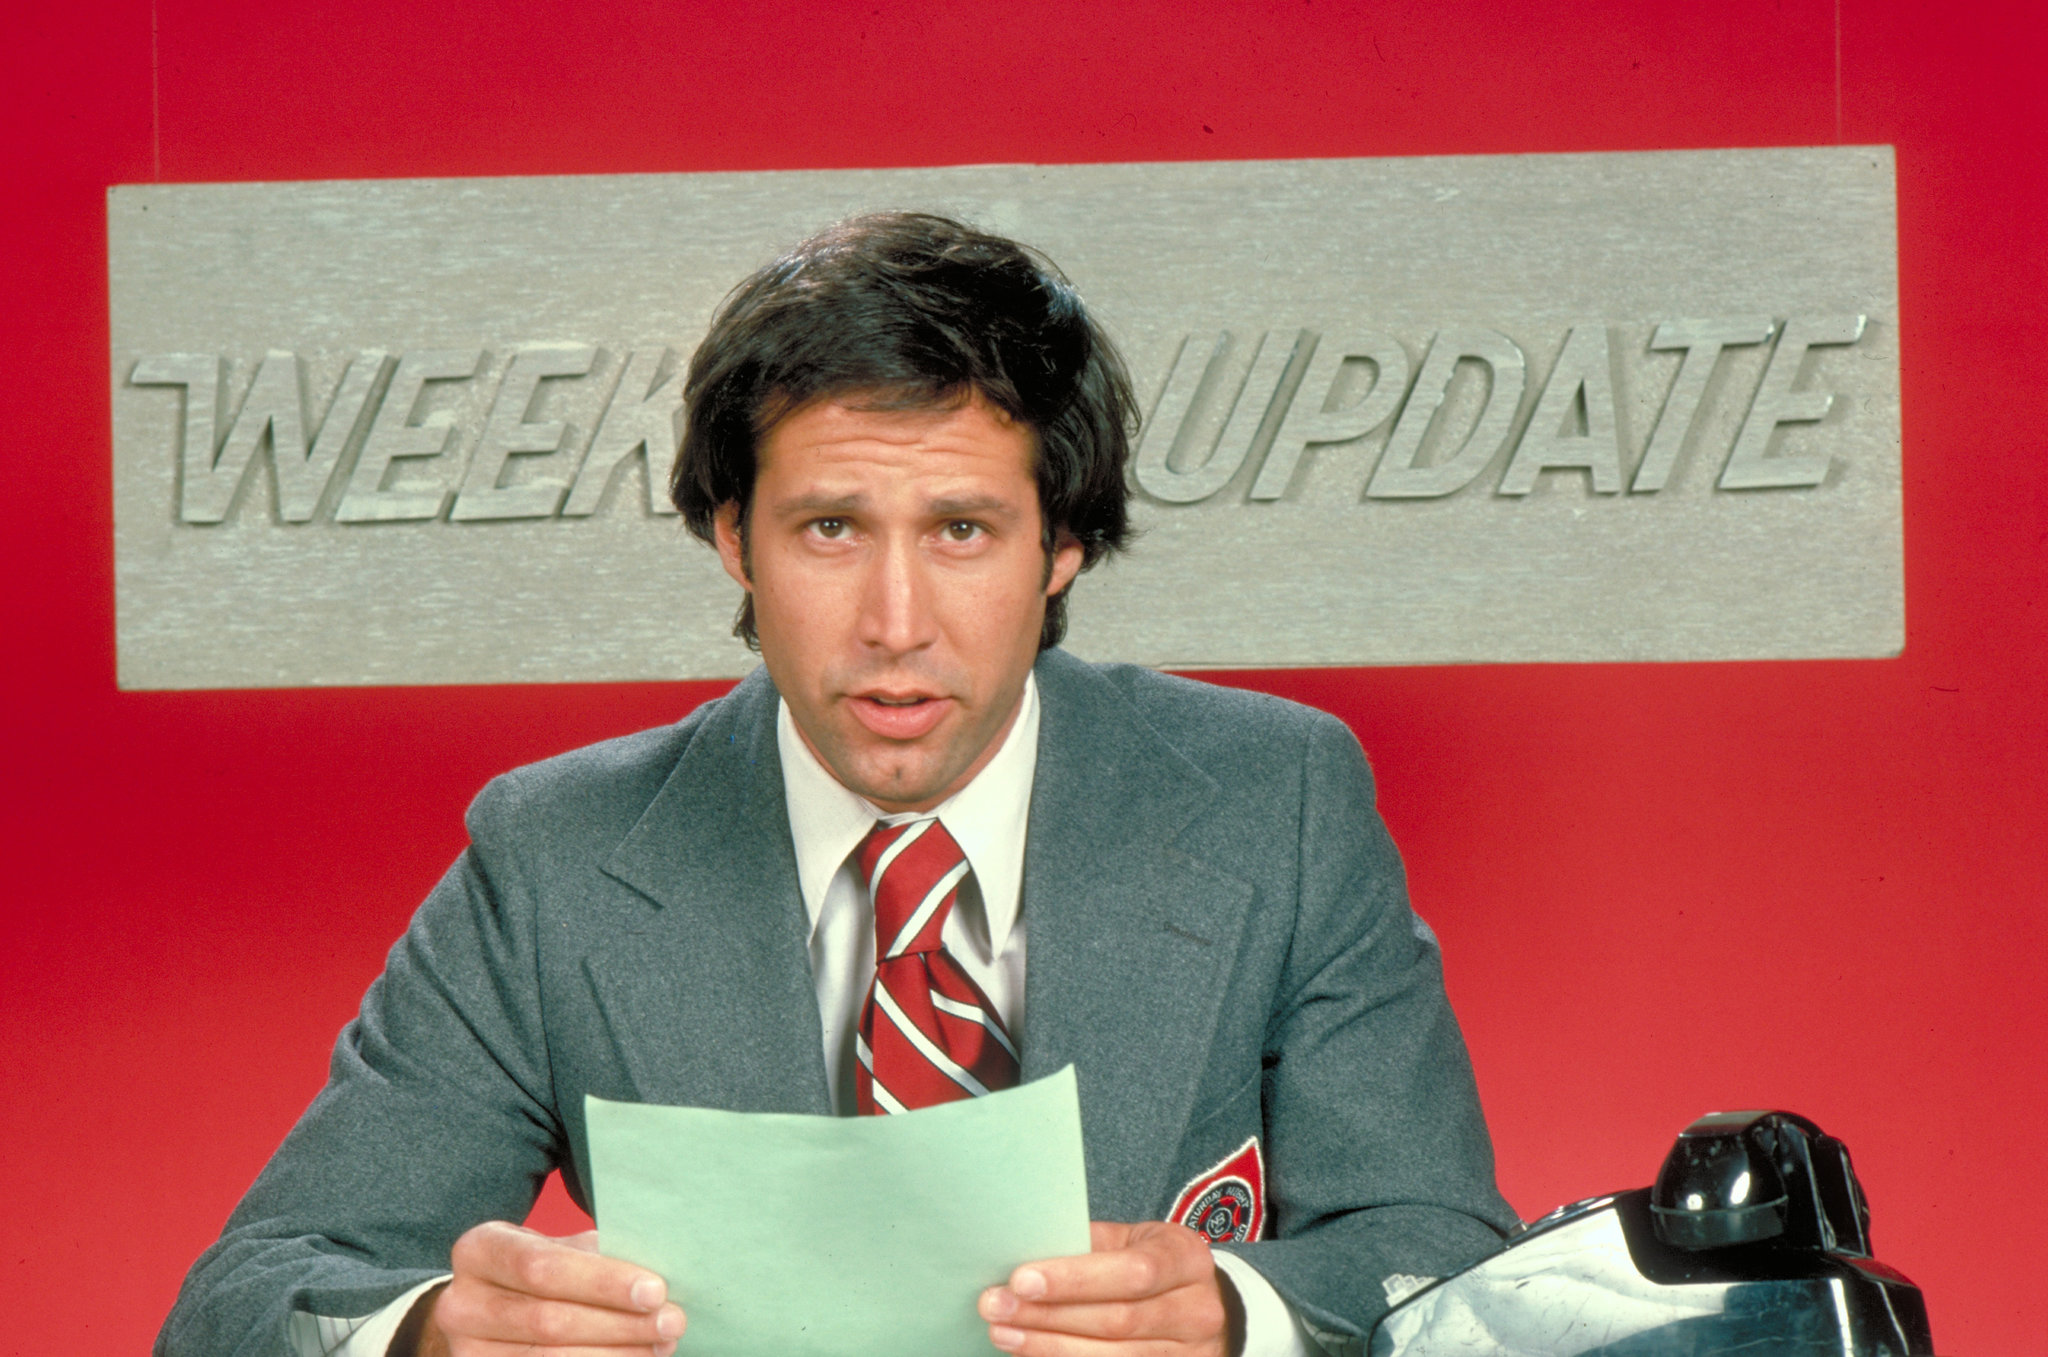 Chevy Chase snl weekend update Blank Meme Template